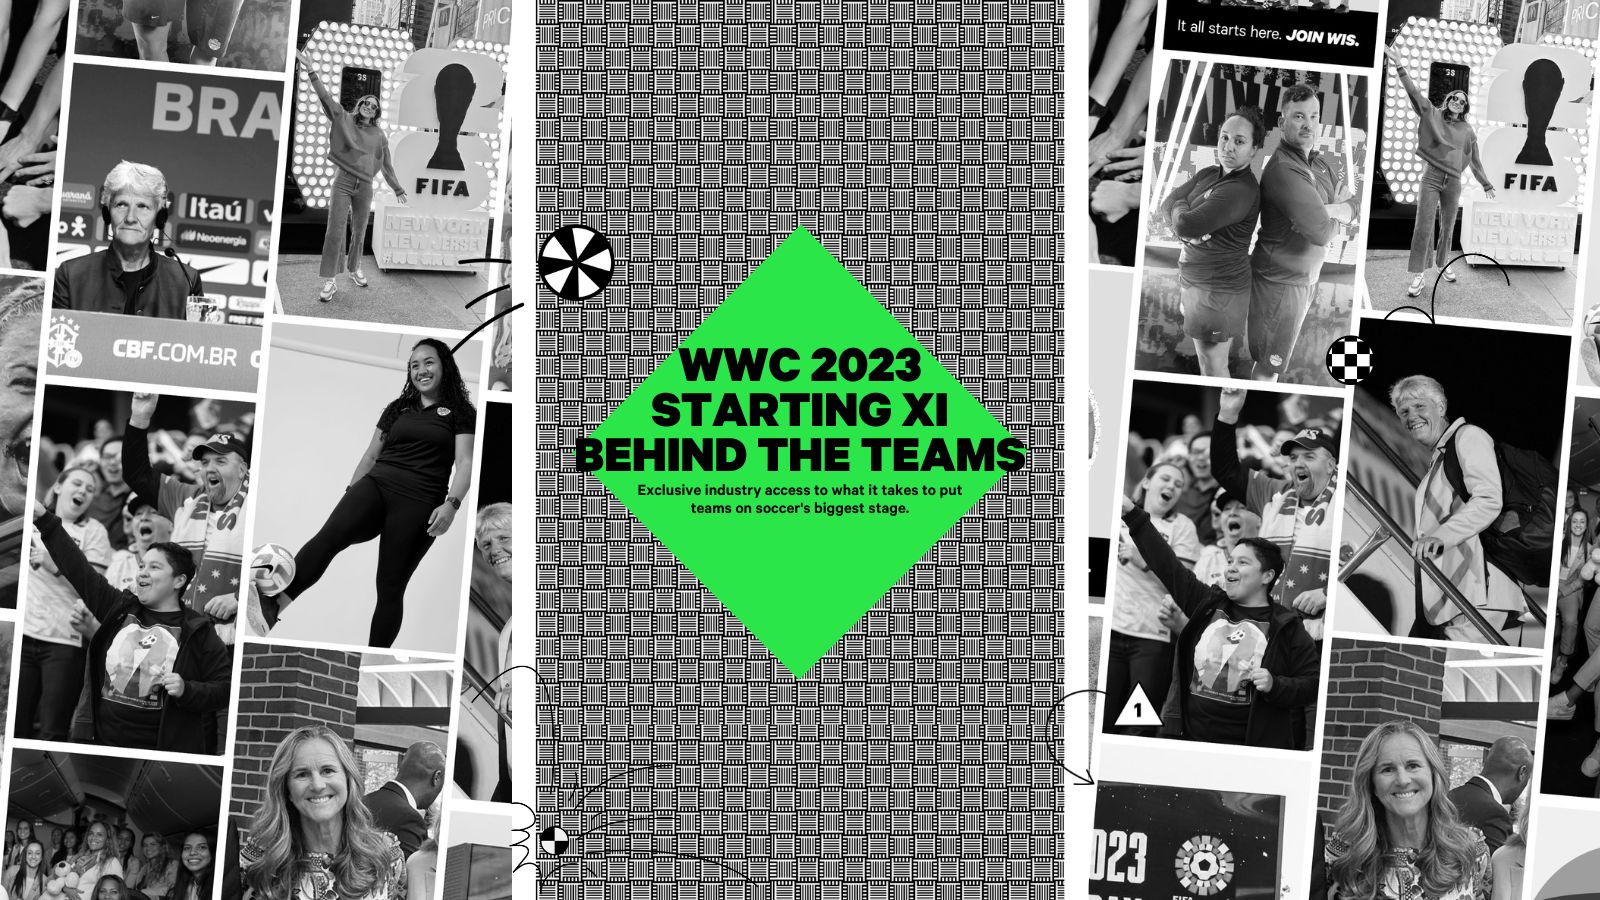 Black and White Graphic with images of the starting XI lineup Women in Soccer is profiling in their World Cup campaign. Including graphics of soccer balls and a green square in the center that reads “WWC 2023 Starting XI Behind the Teams: Exclusive industry access to what it takes to put teams on soccer's biggest stage.